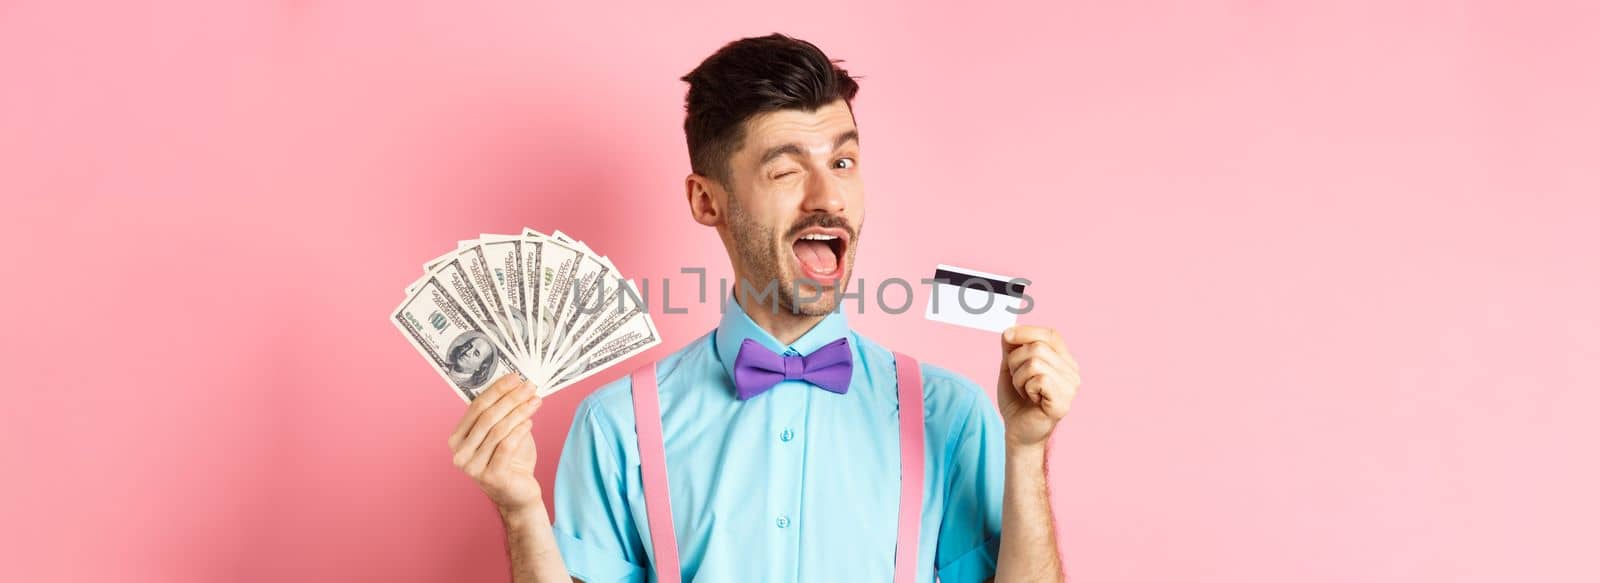 Cheerful caucasian man in bow-tie winking at you, showing plastic credit card and money, recommending special deal, standing on pink background.